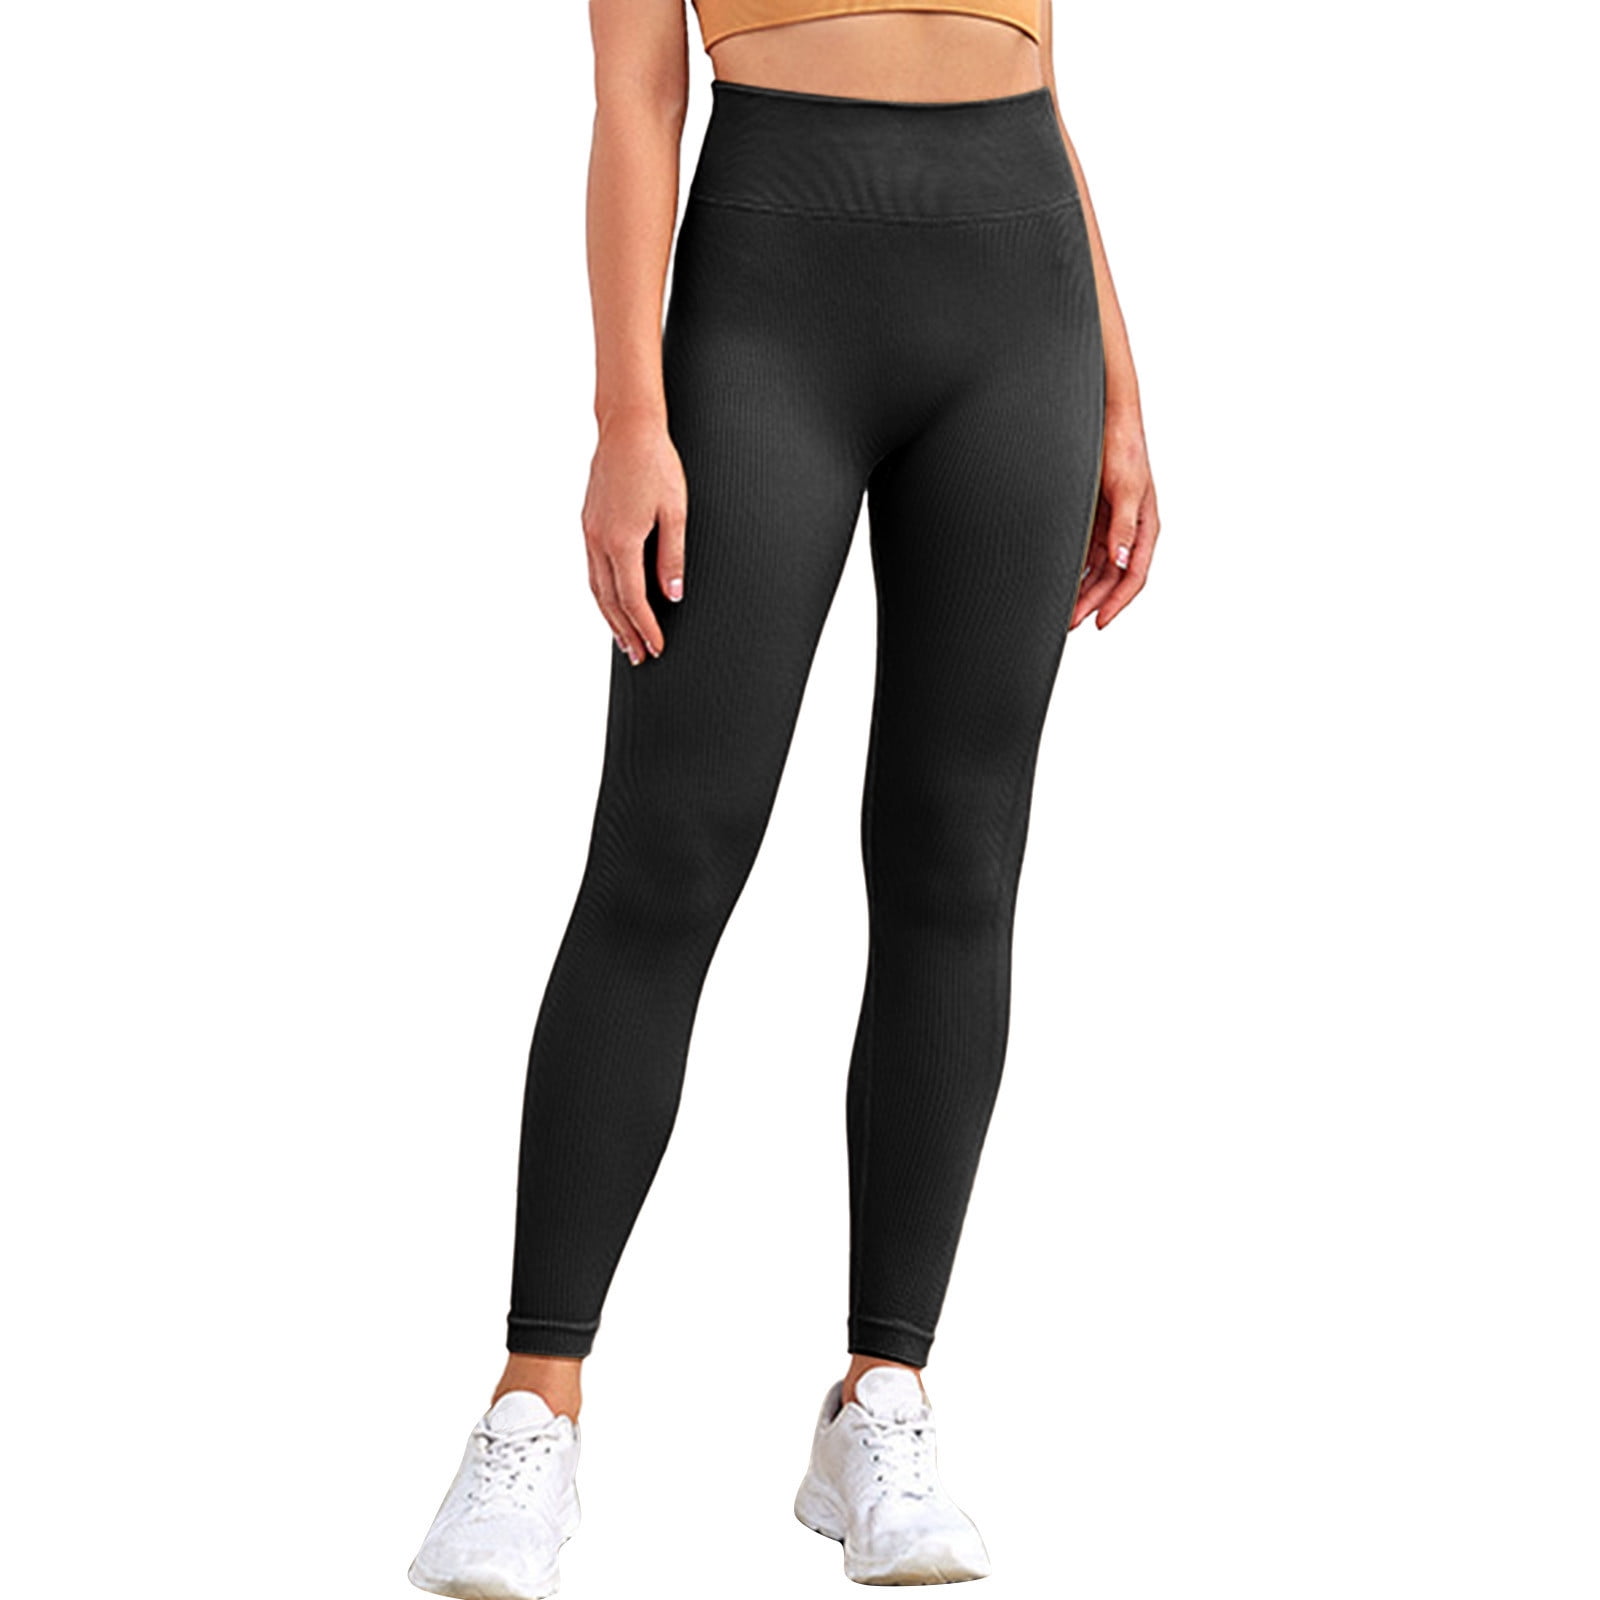 Pants For Women Dressy Casual Yoga Leggings Workout Solid Tummy